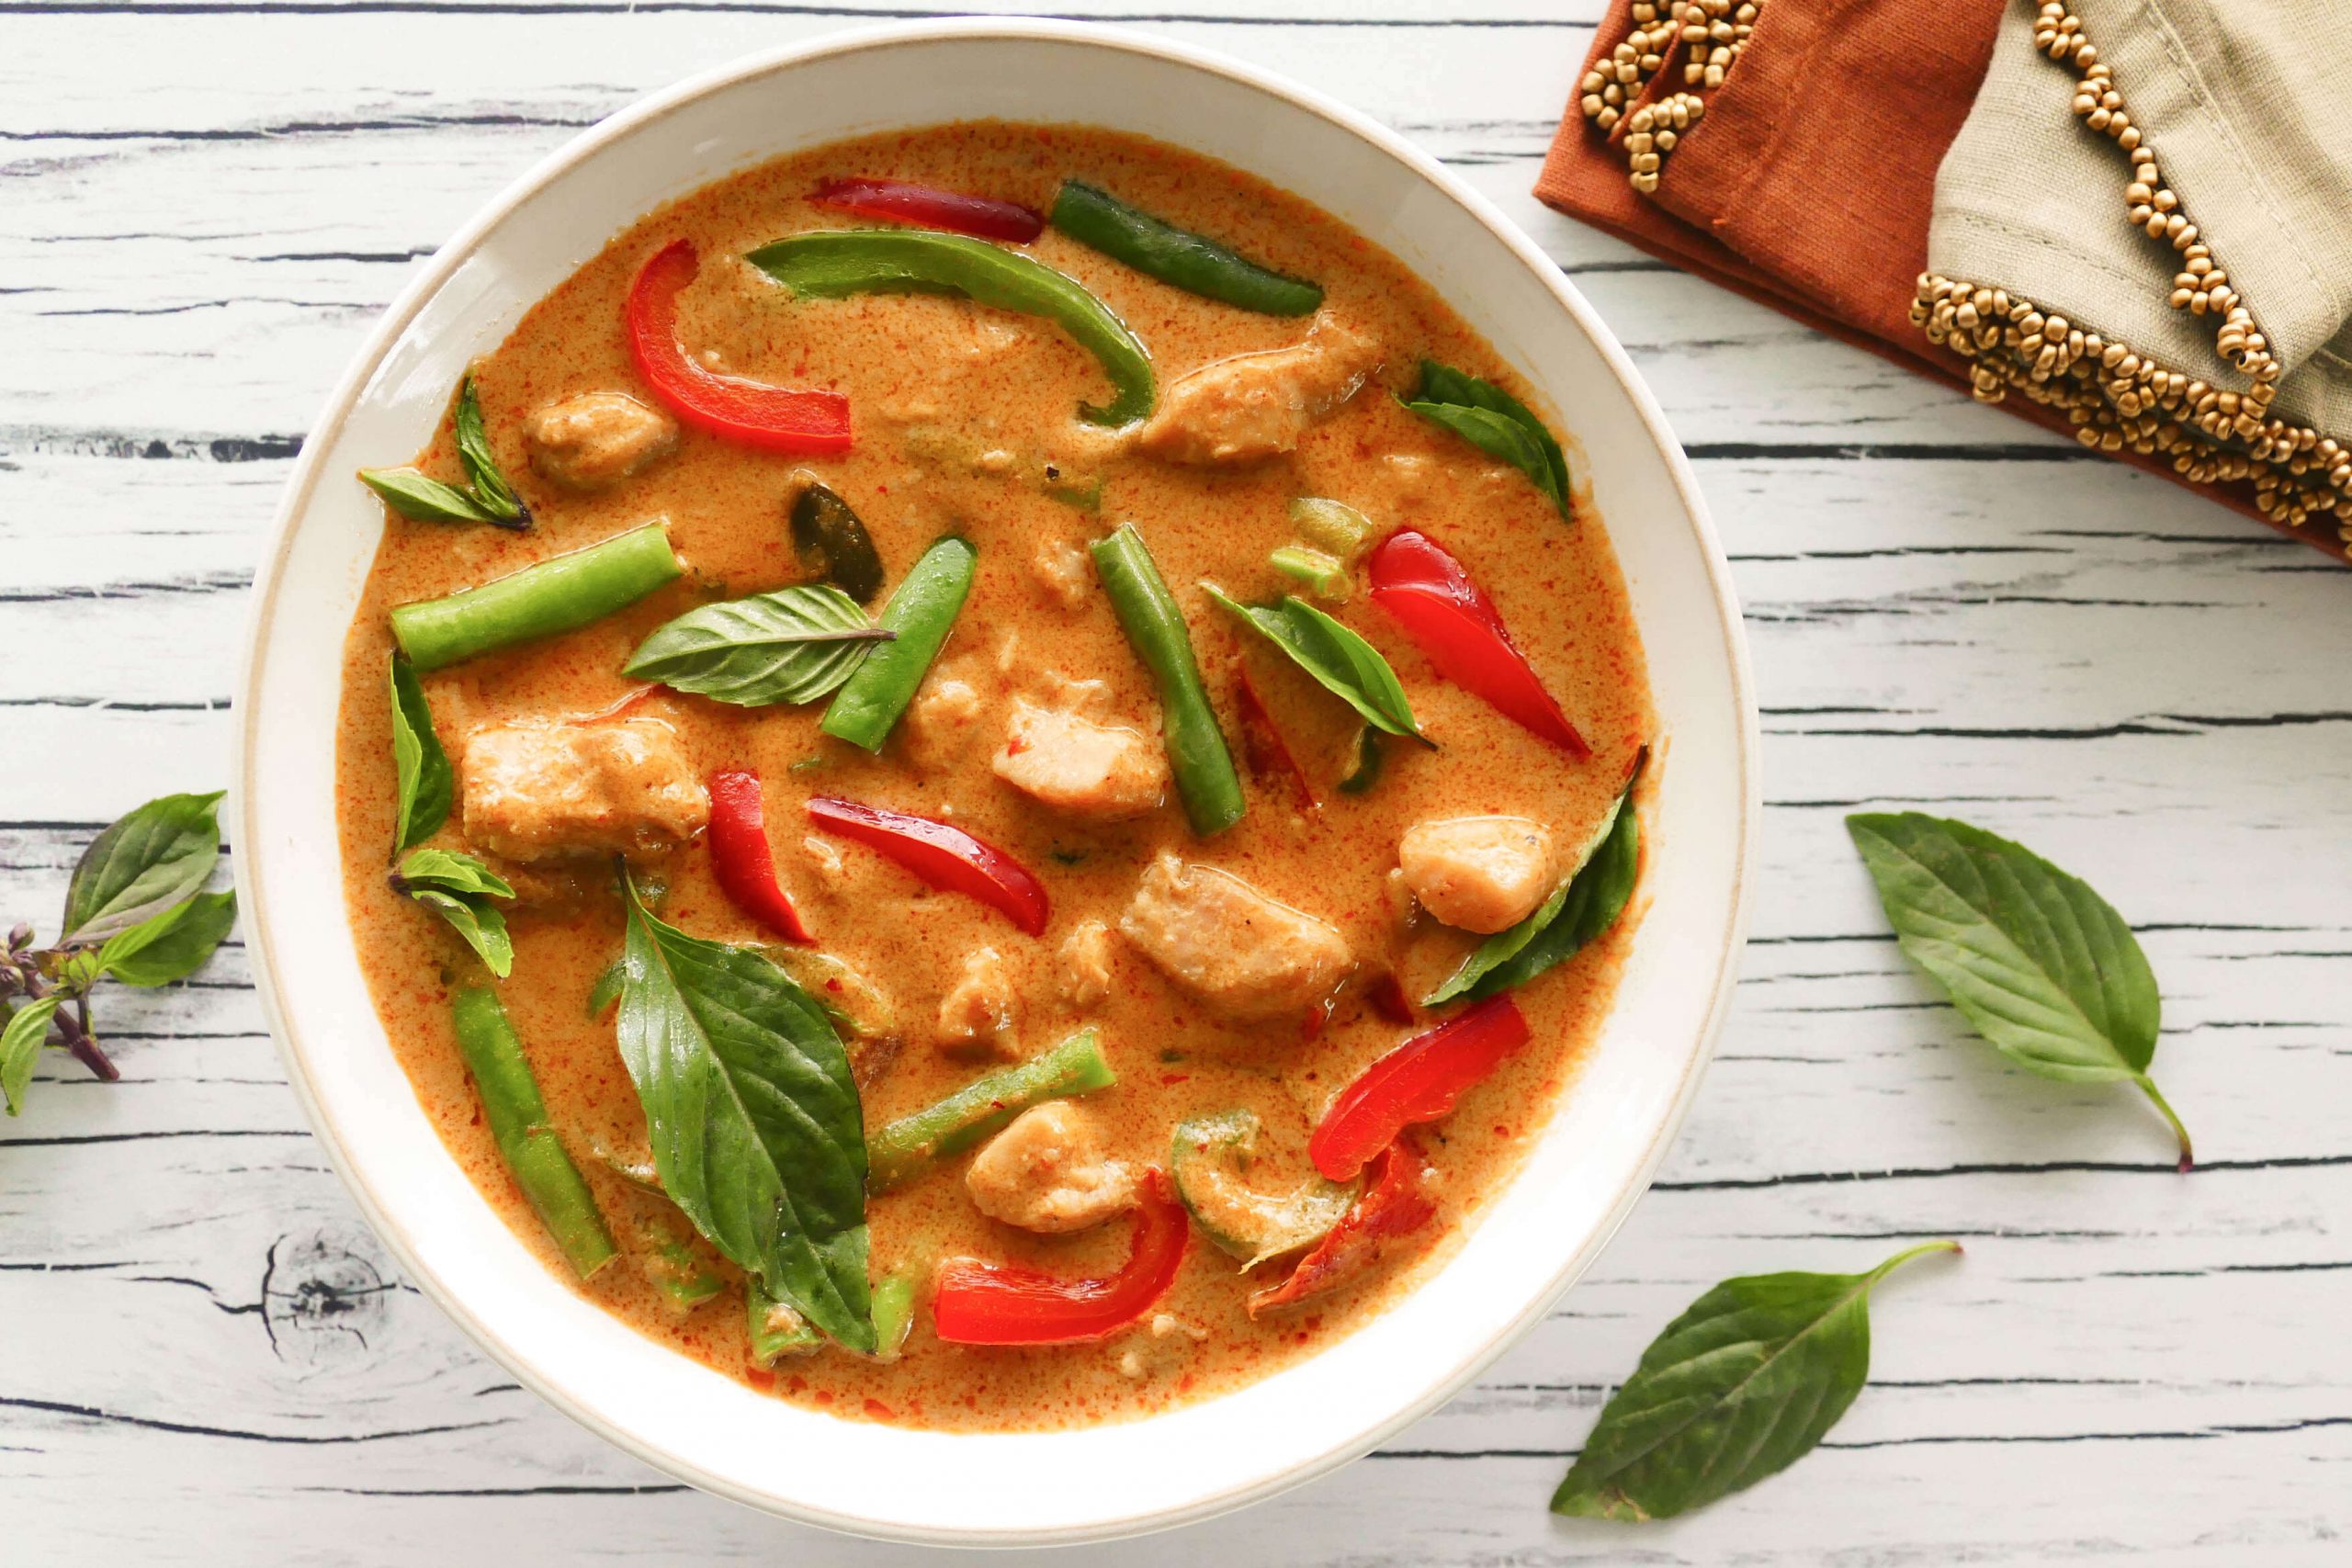 Instant Pot Panang Curry with chicken, green beans, red and green peppers, Thai basil in a white bowl on a light wood background